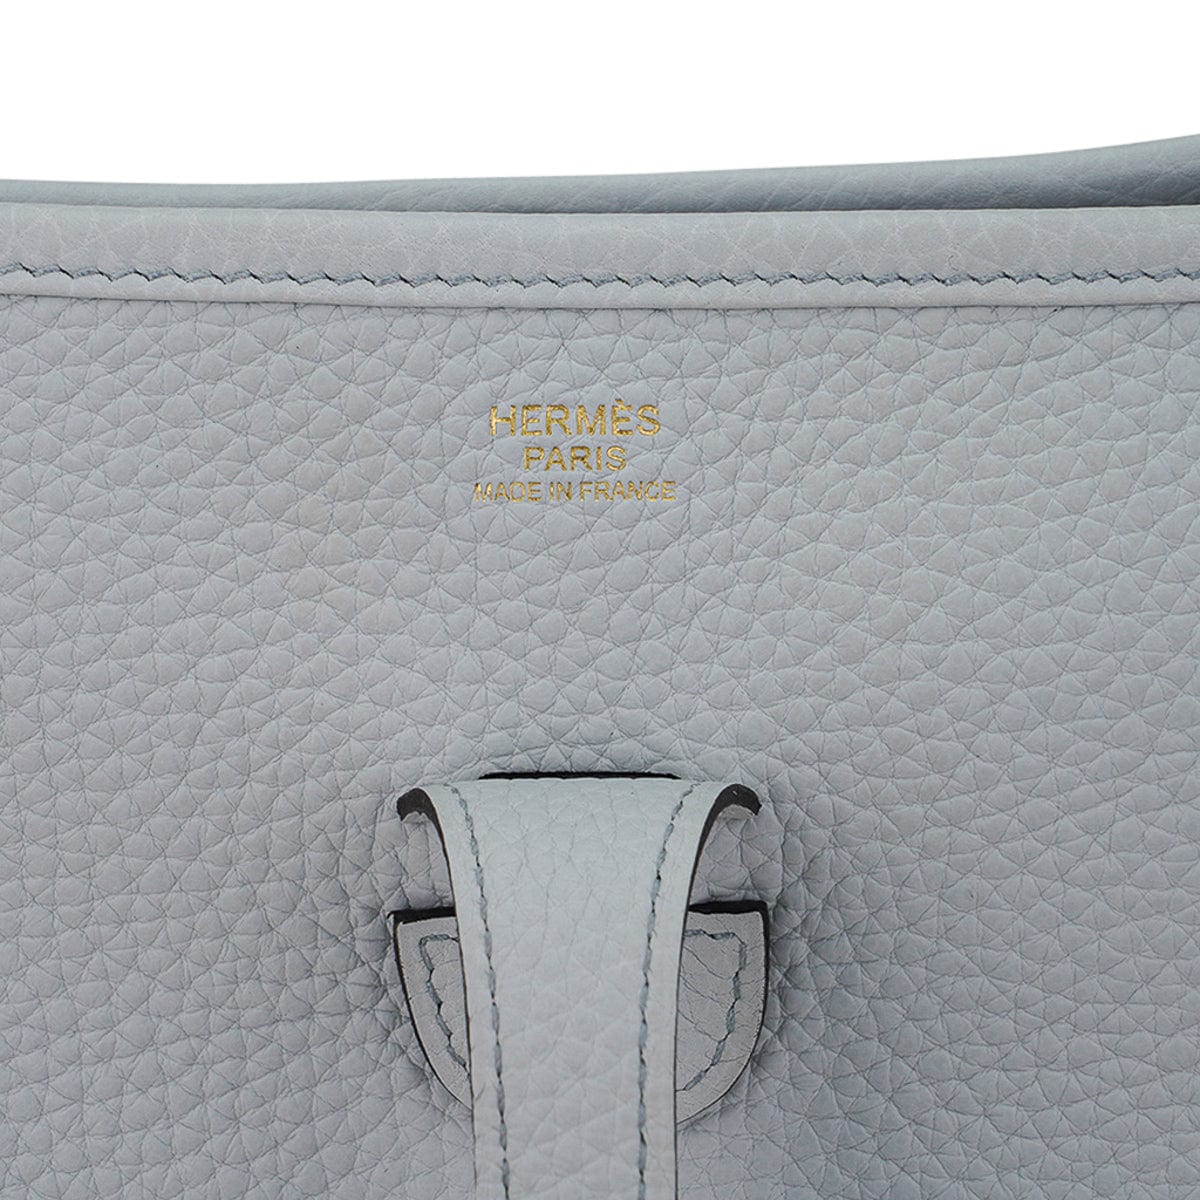 Hermès Evelyne PM Bag Blue Clemence Leather in 2023